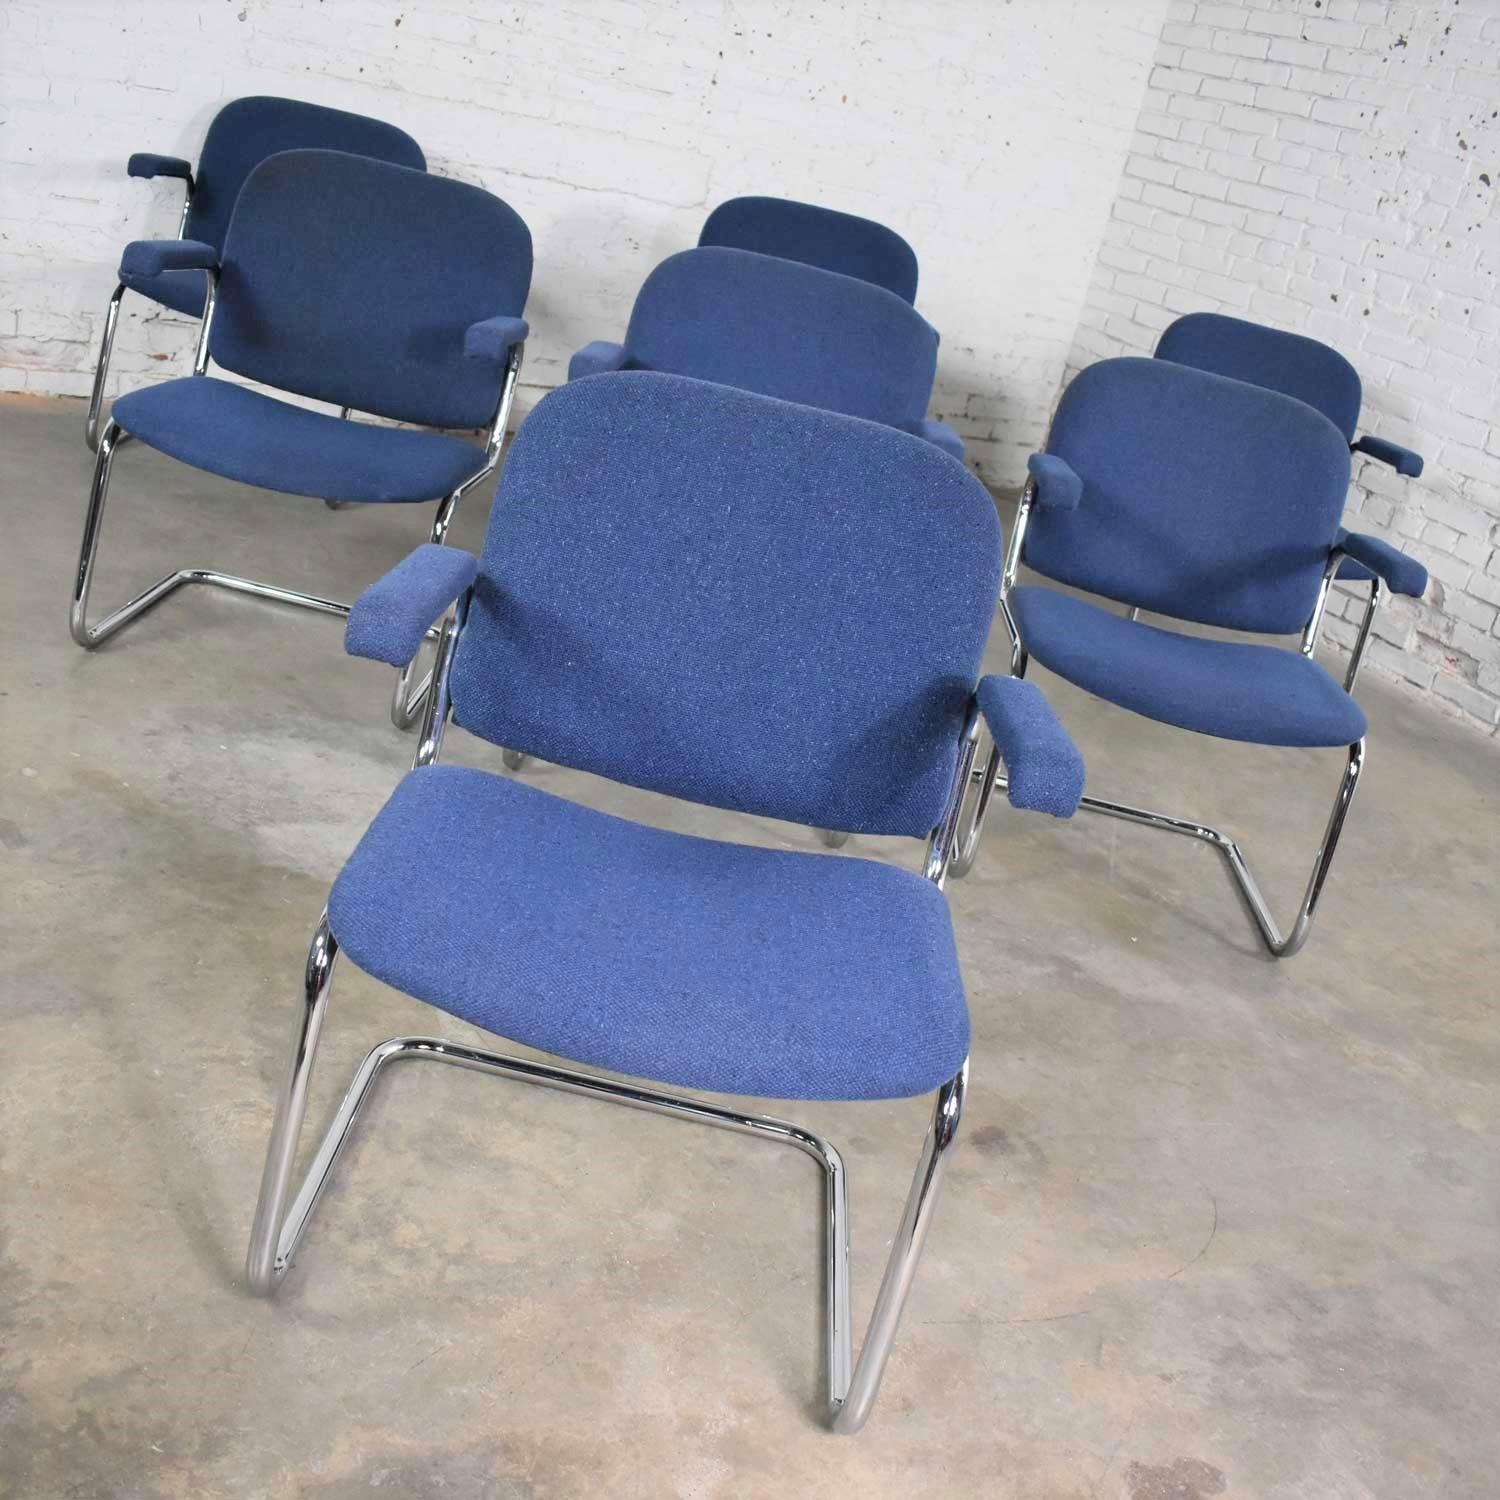 Awesome vintage cantilever tubular chrome and blue hopsack fabric upholstered lounge chairs in the manner of Thonet. There are set of seven chairs available. All are in wonderful vintage condition with normal wear for their age. The upholstery has